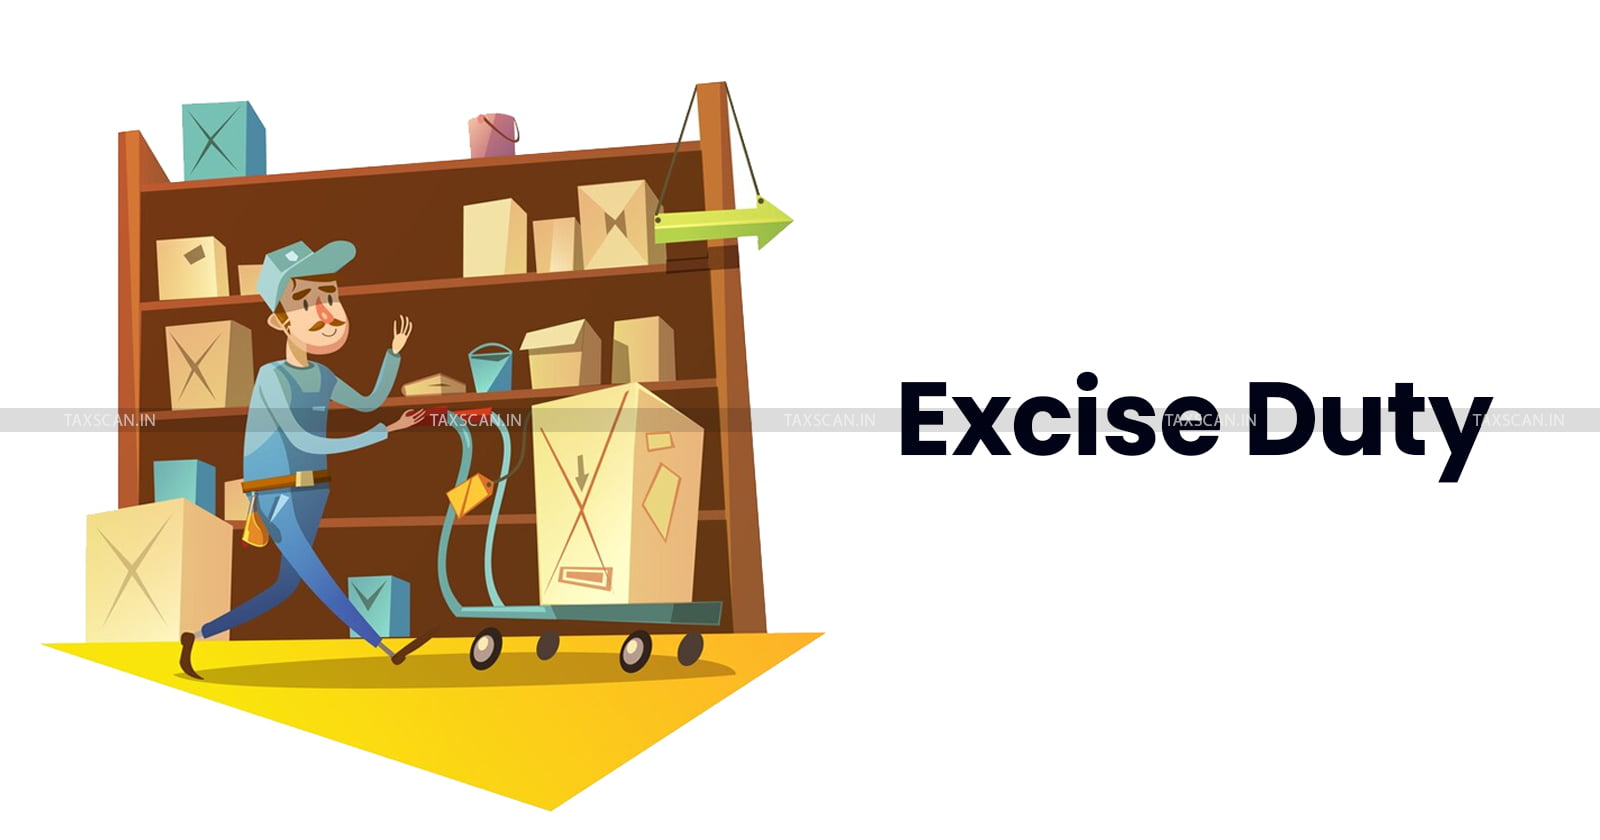 CESTAT - Excise Duty Demand - Clearance of Coals - Coals - Transferor Unit - CESTAT Quashes Excise Duty Demand on Clearance of Coals from Transferor Unit on ground of Limitation - taxscan